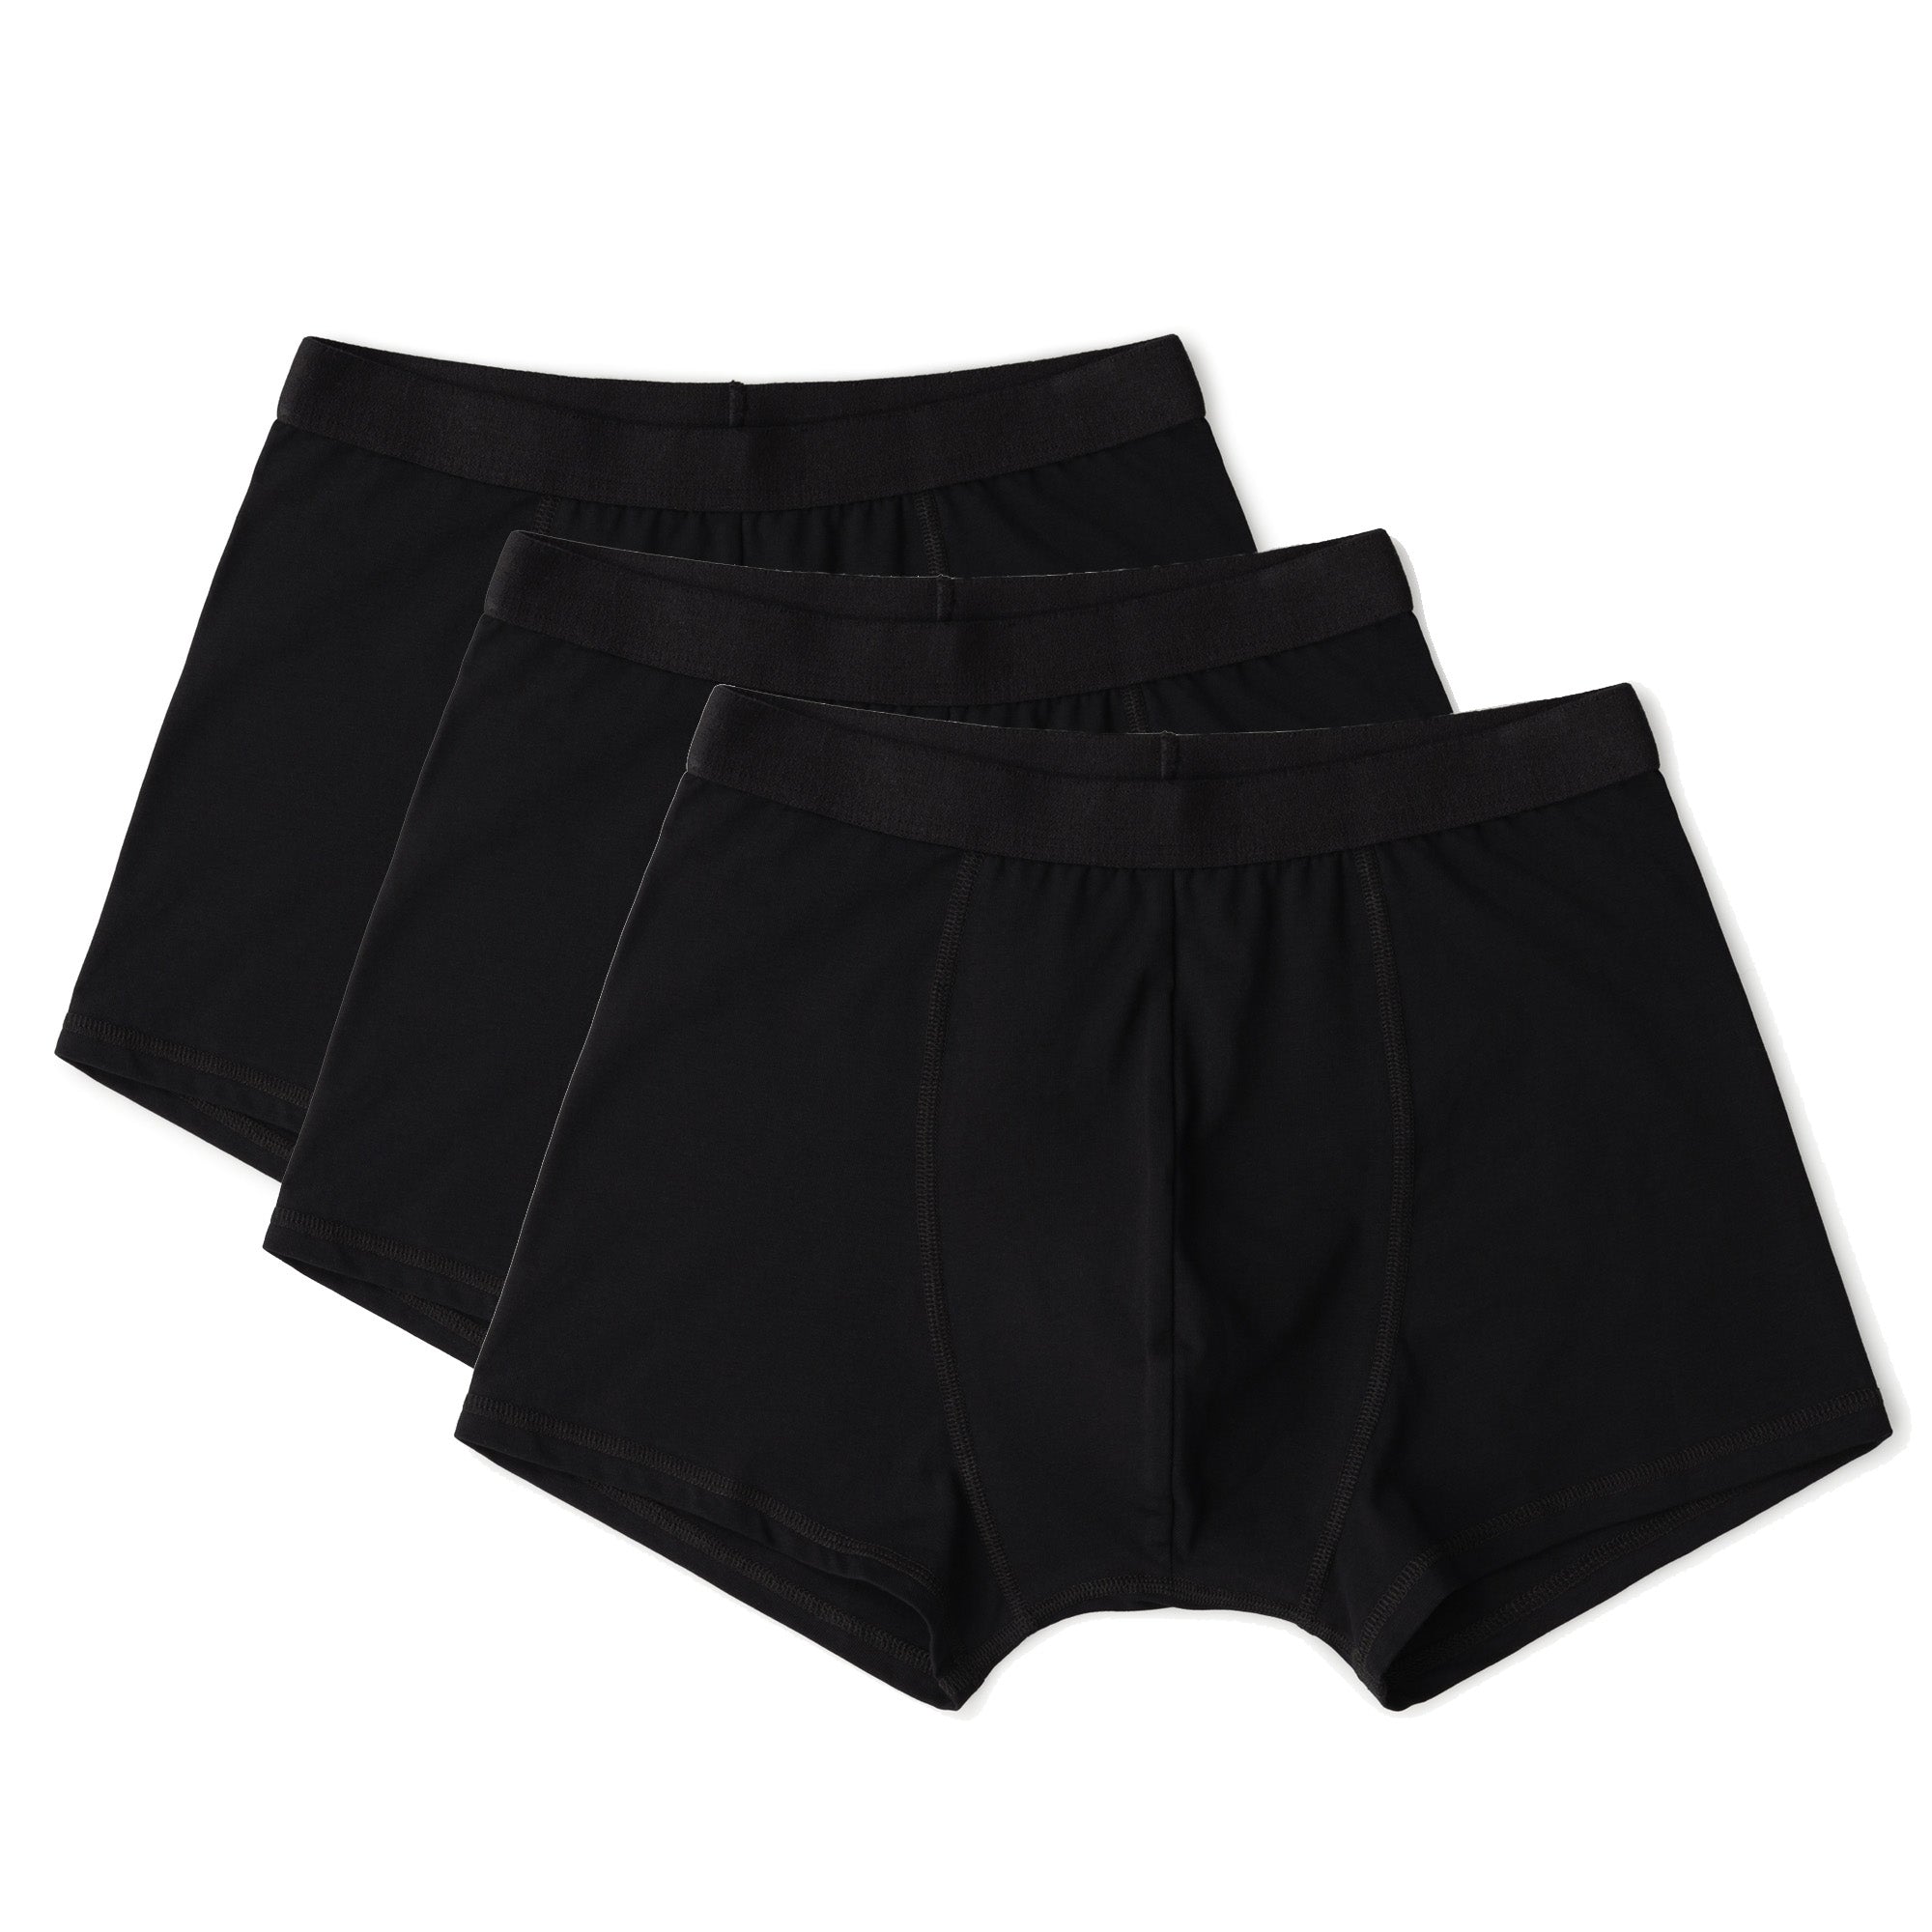 Black Organic & Recycled cotton Boxer Briefs 3 pack